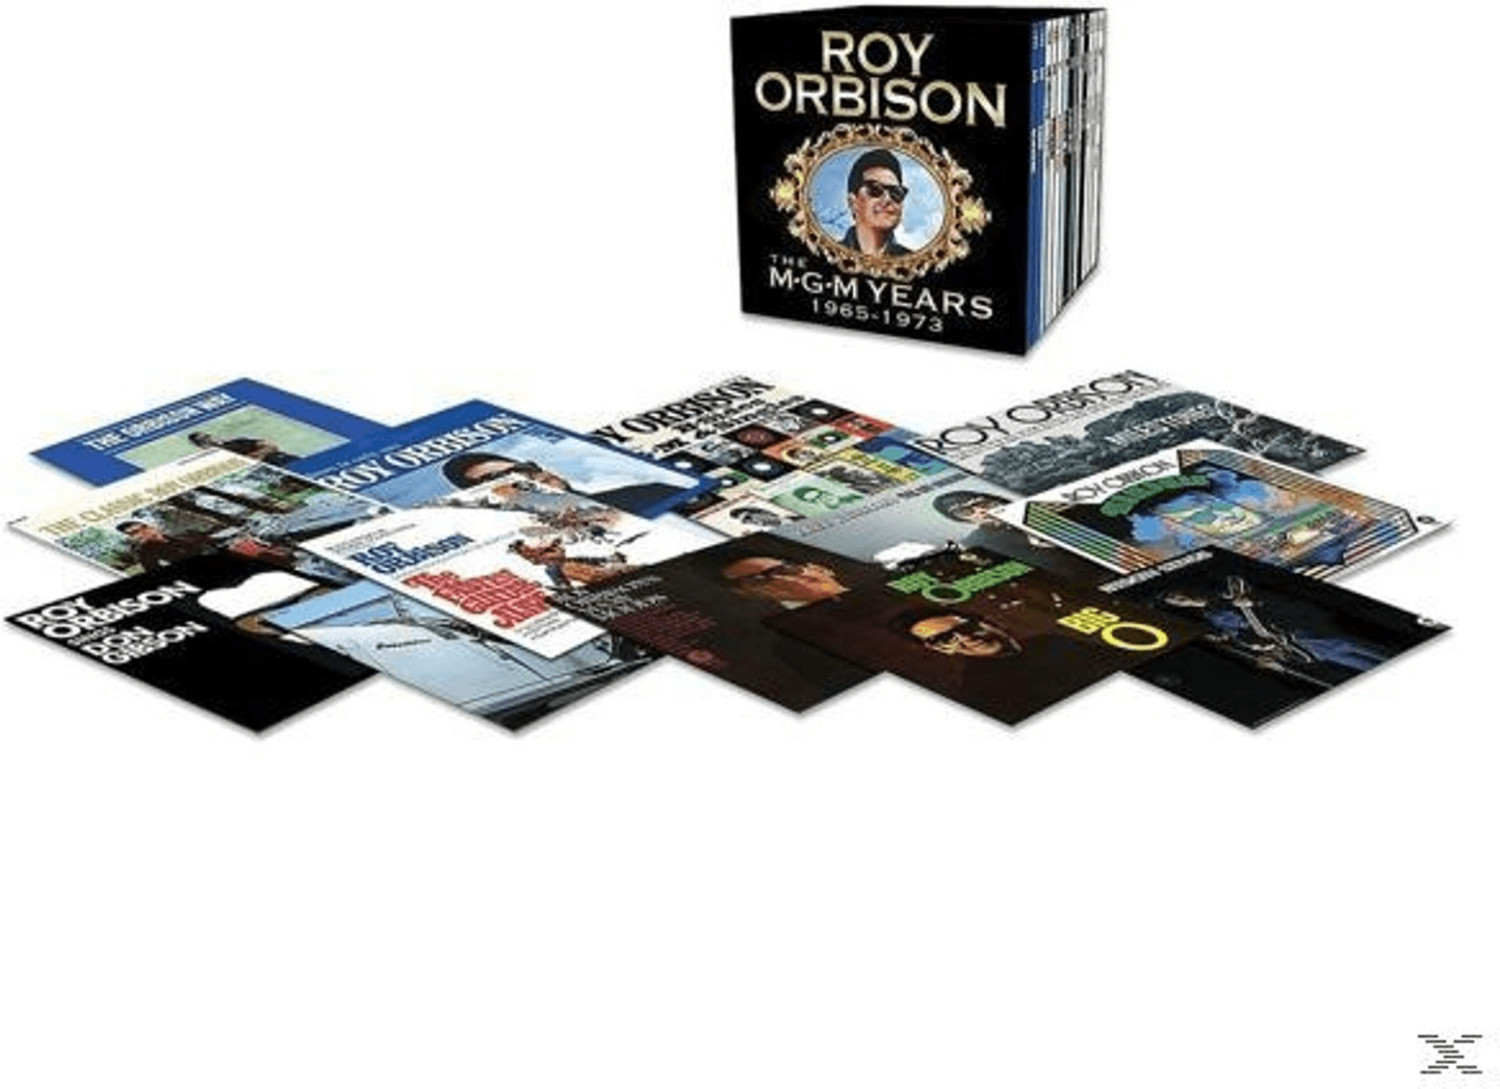 Roy Orbison - Roy Orbison "The MGM Years" (Limited 14-LP-Box) (Vinyl)